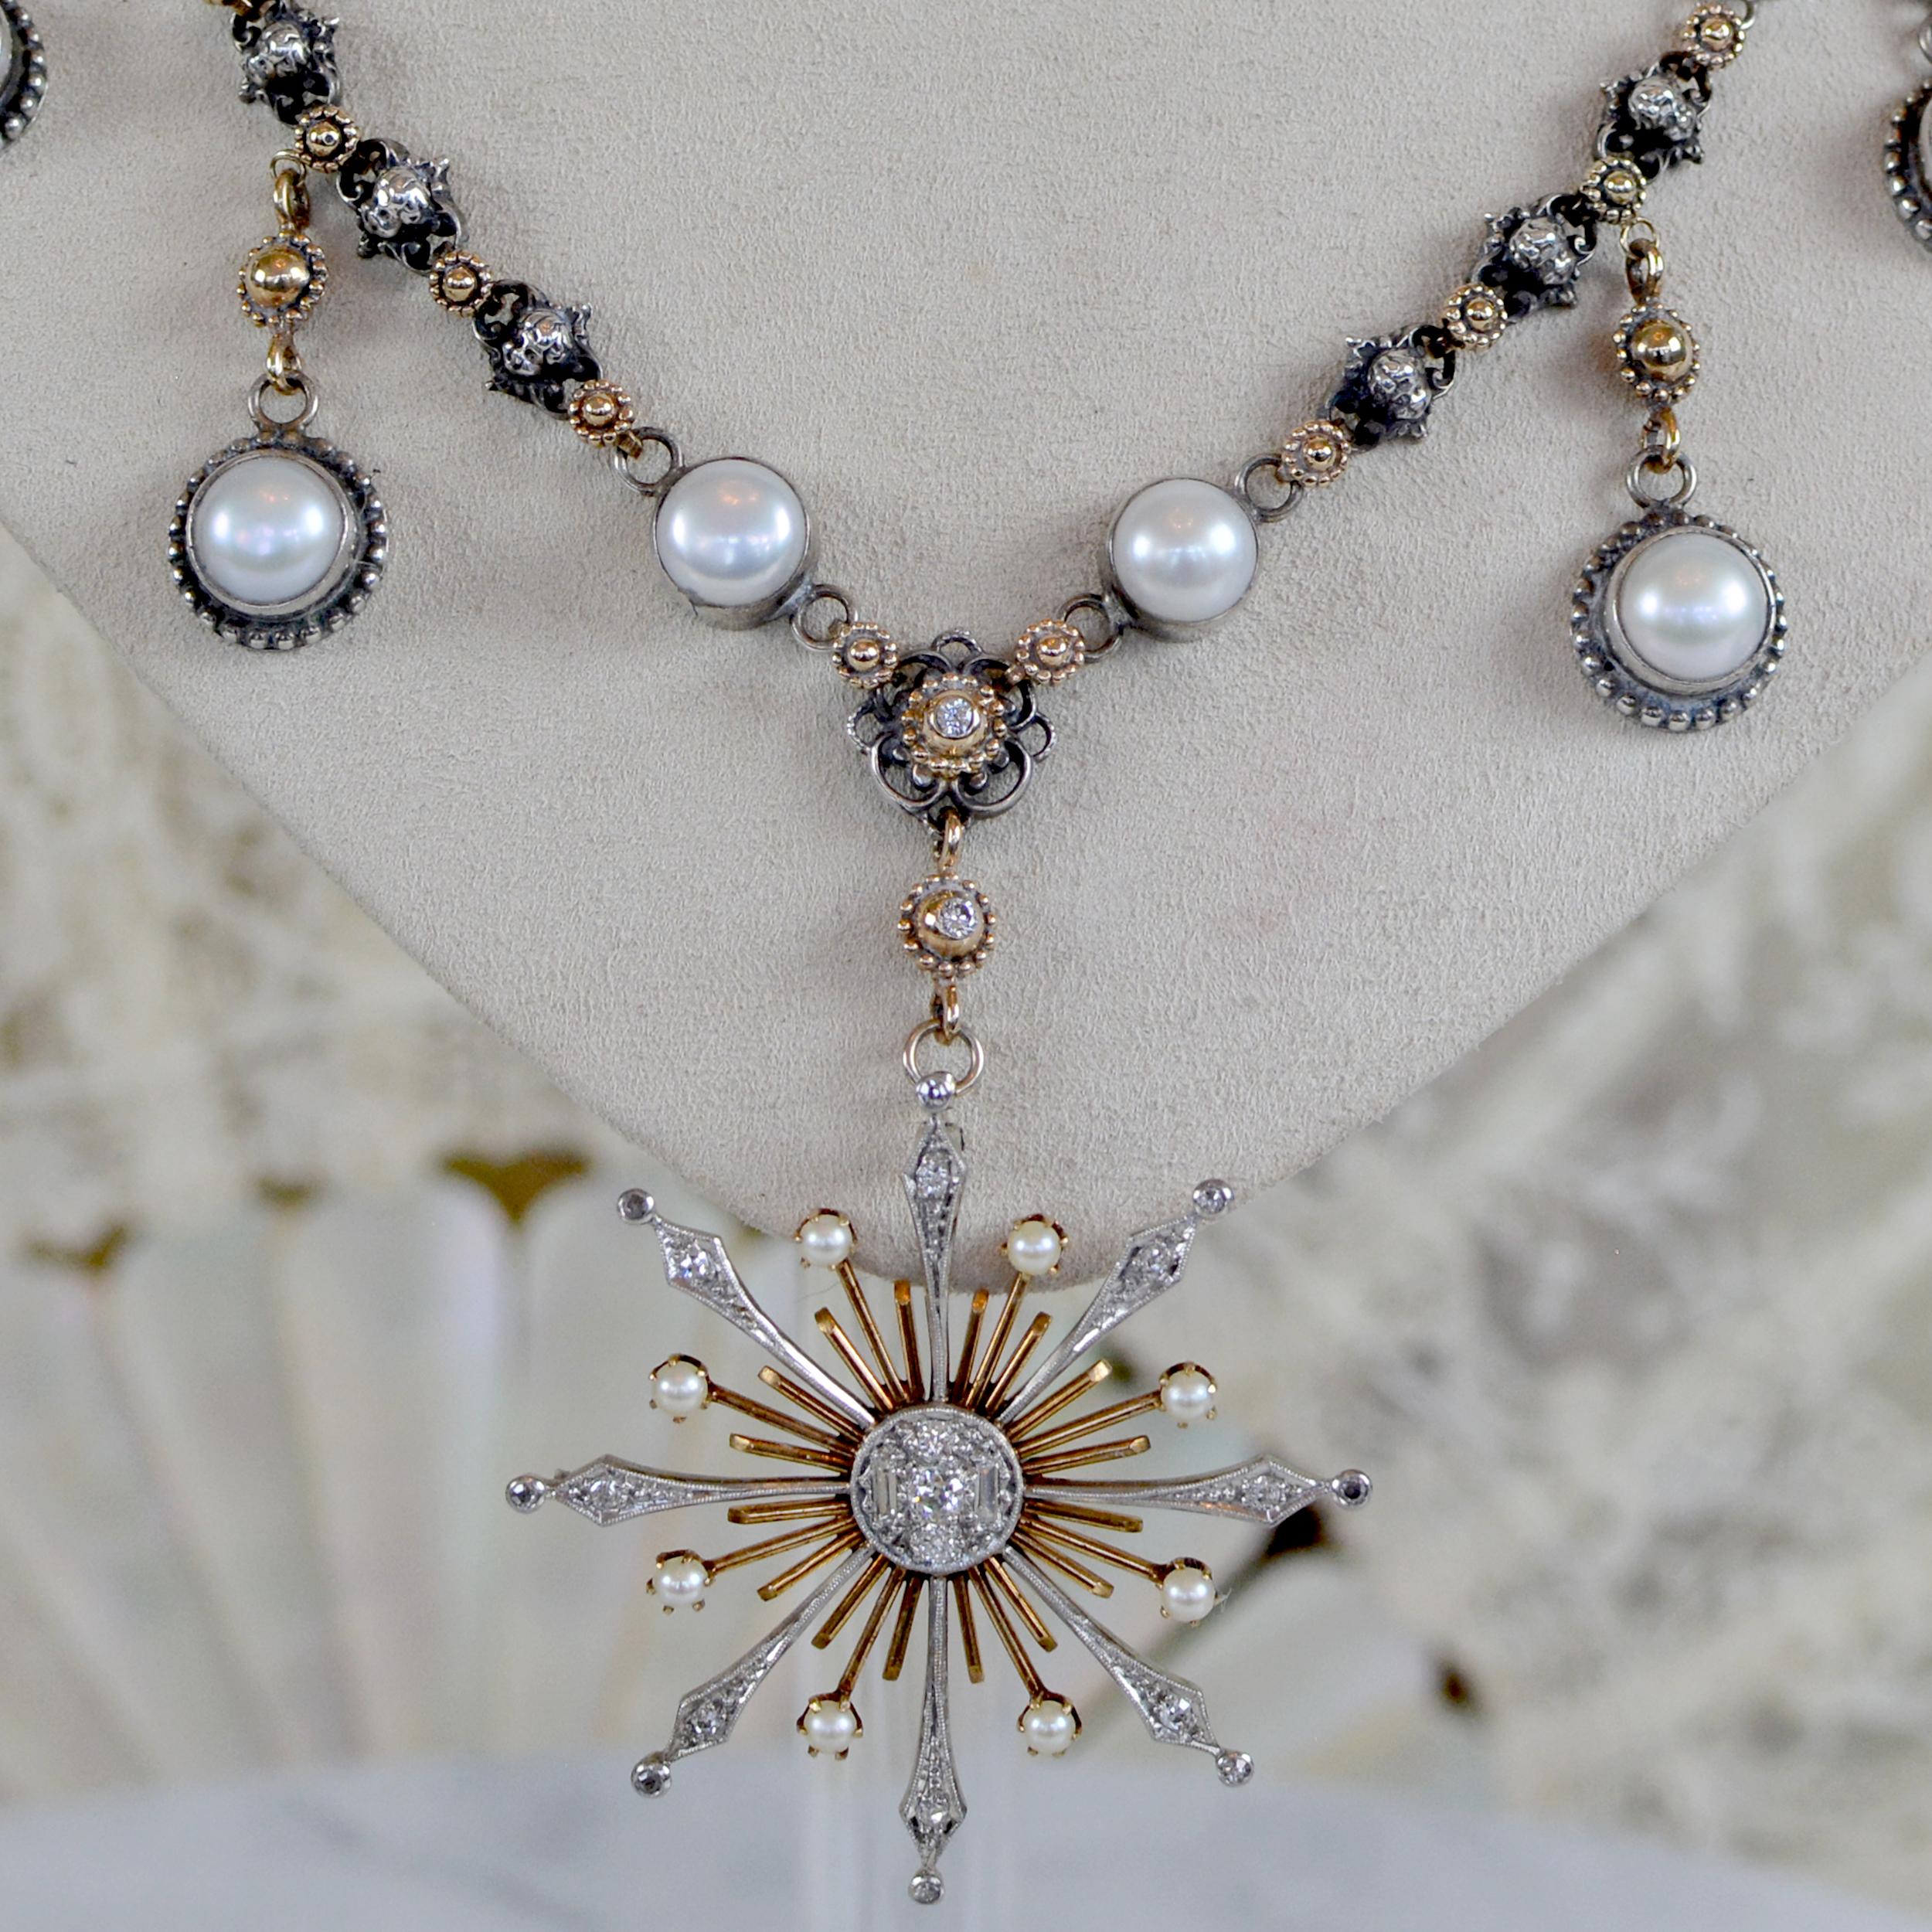 Baroque Jill Garber Diamond and Pearl Starburst Drop Necklace - 14 kt. Gold and Silver For Sale